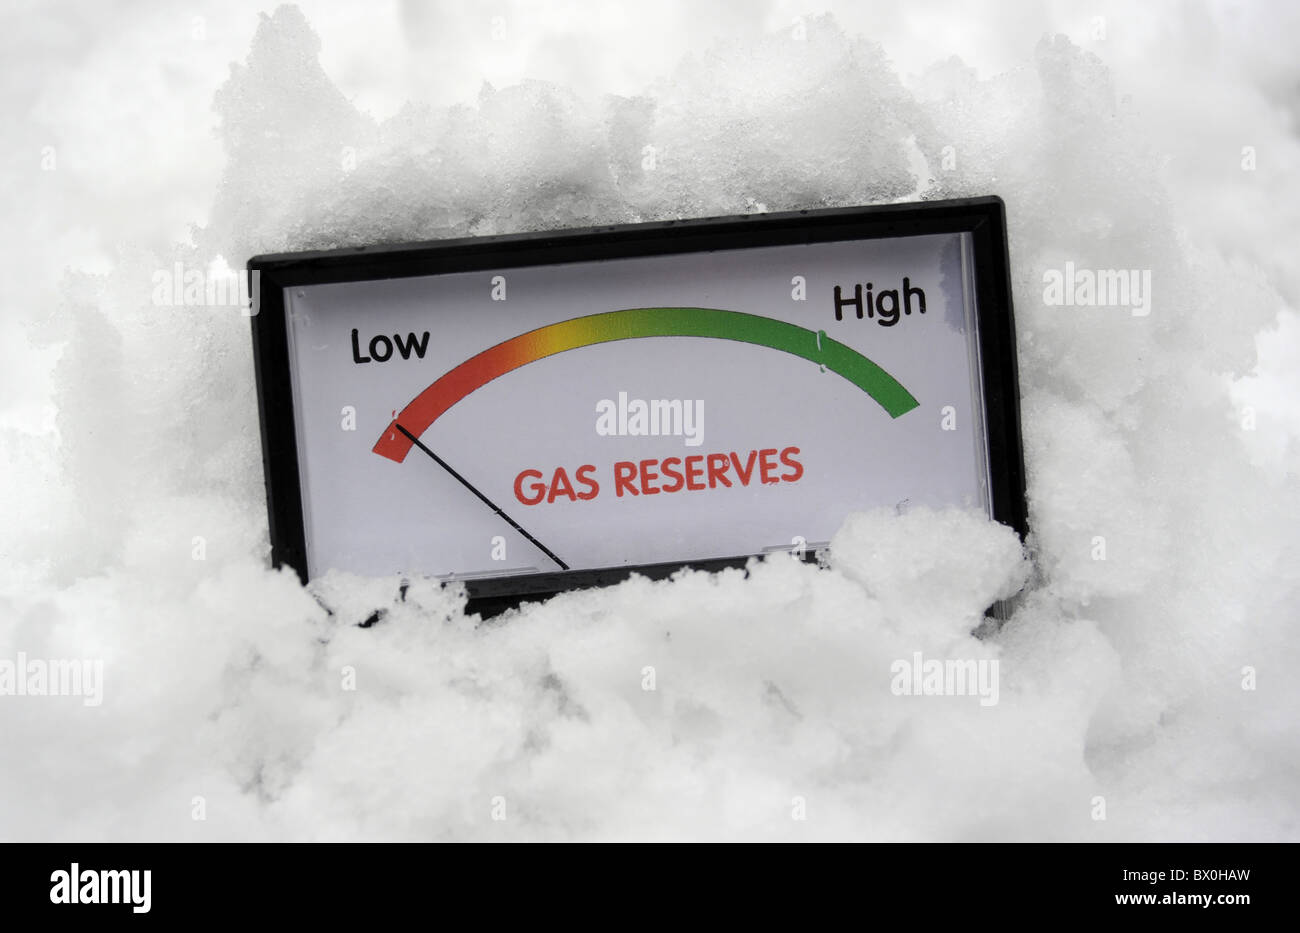 METER SHOWING LOW GAS RESERVES IN ICY SNOWY FREEZING CONDITONS RE GAS PRICES SUPPLIES COMPANIES ETC Stock Photo